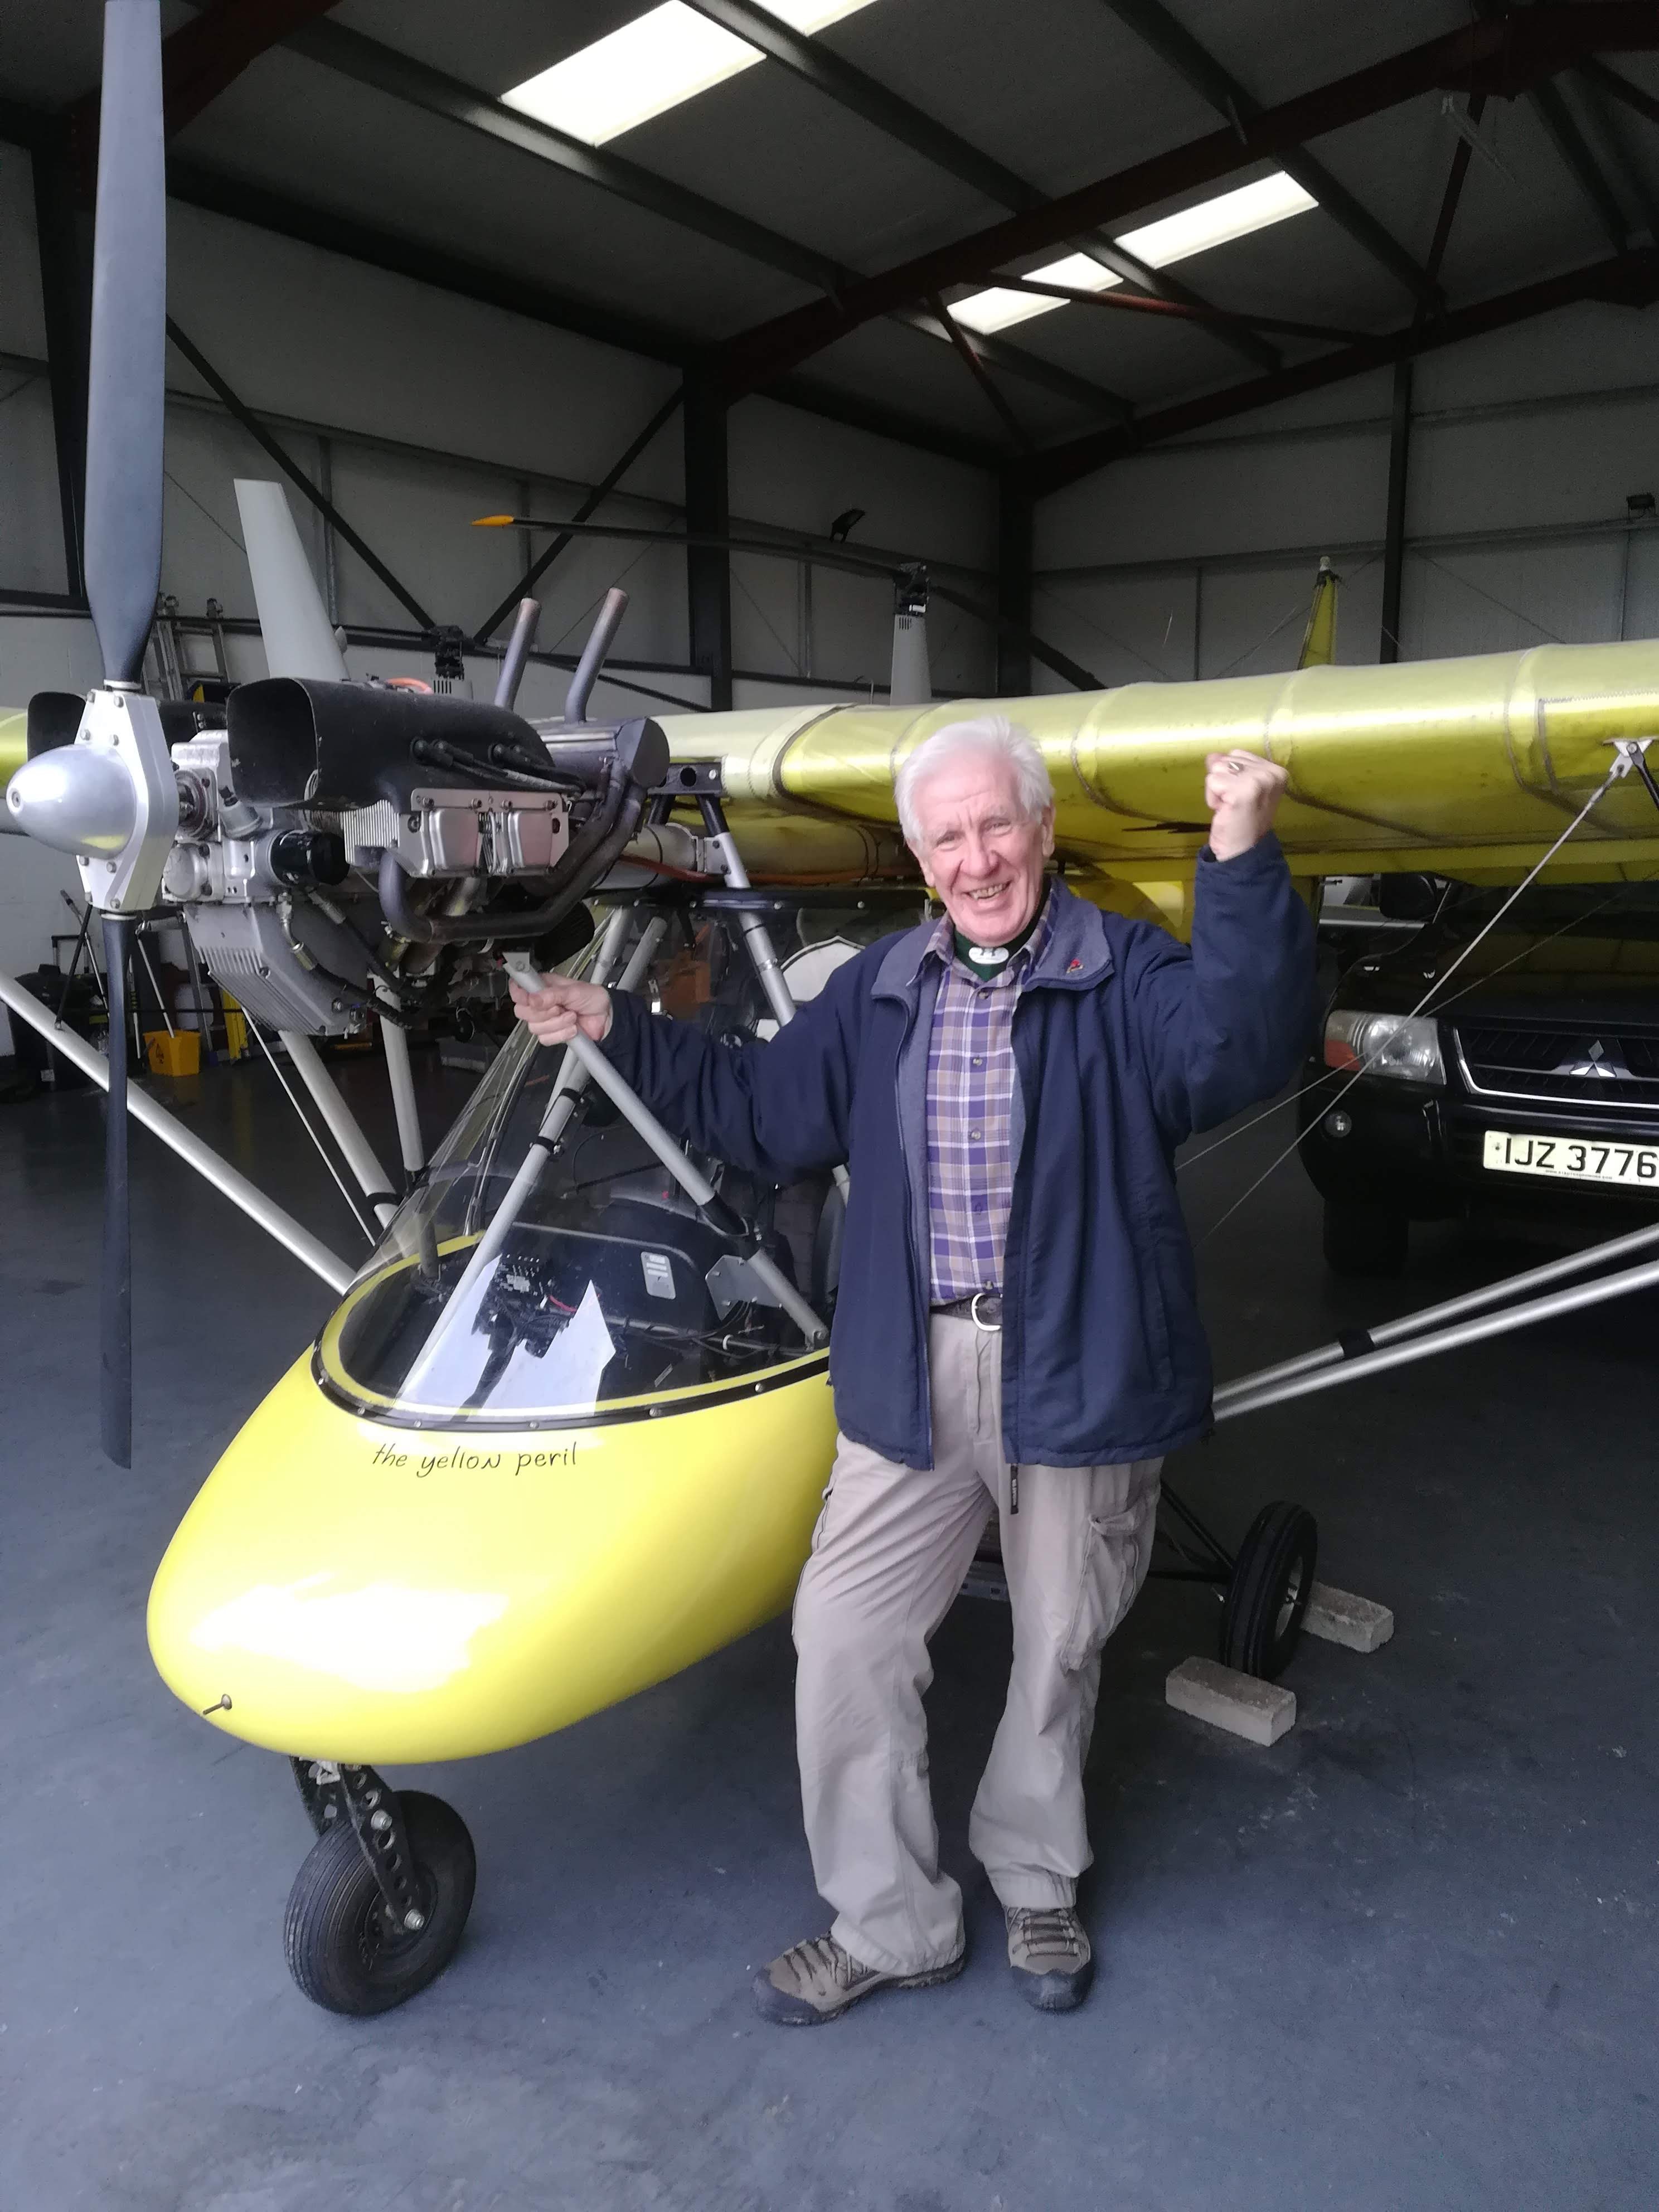 Joe McCarrison gets his Pilot's license and buys a plane